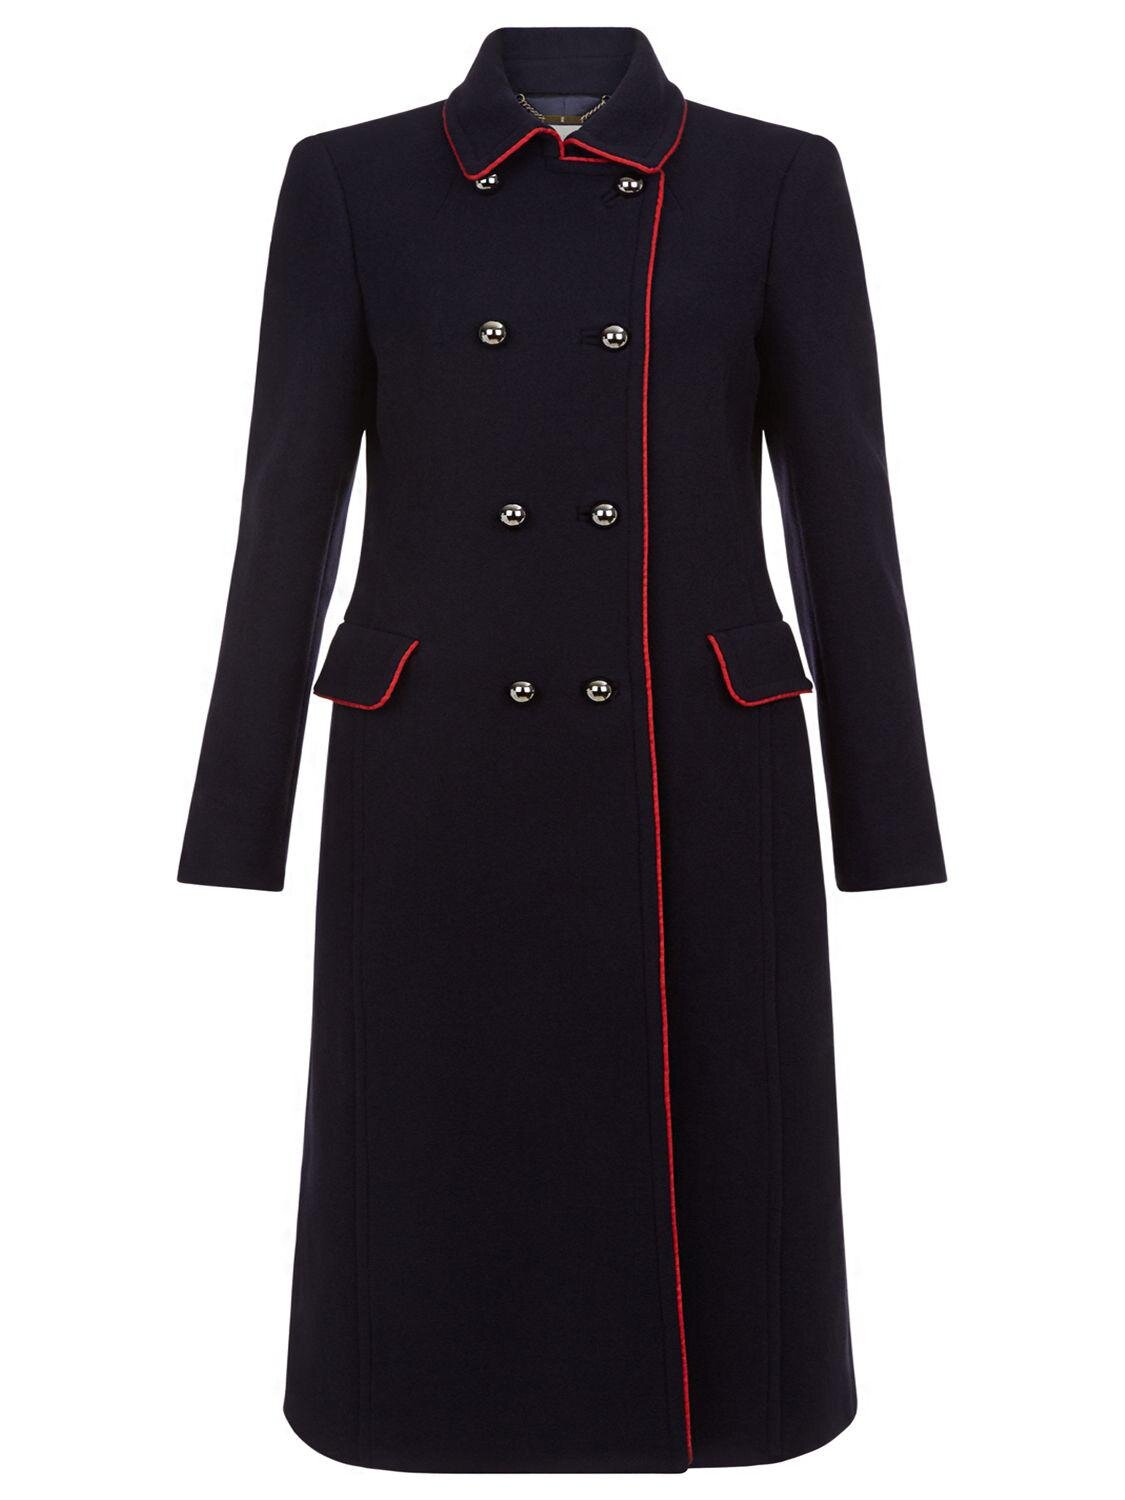 Hobbs Carla Coat in Navy and Red — UFO No More